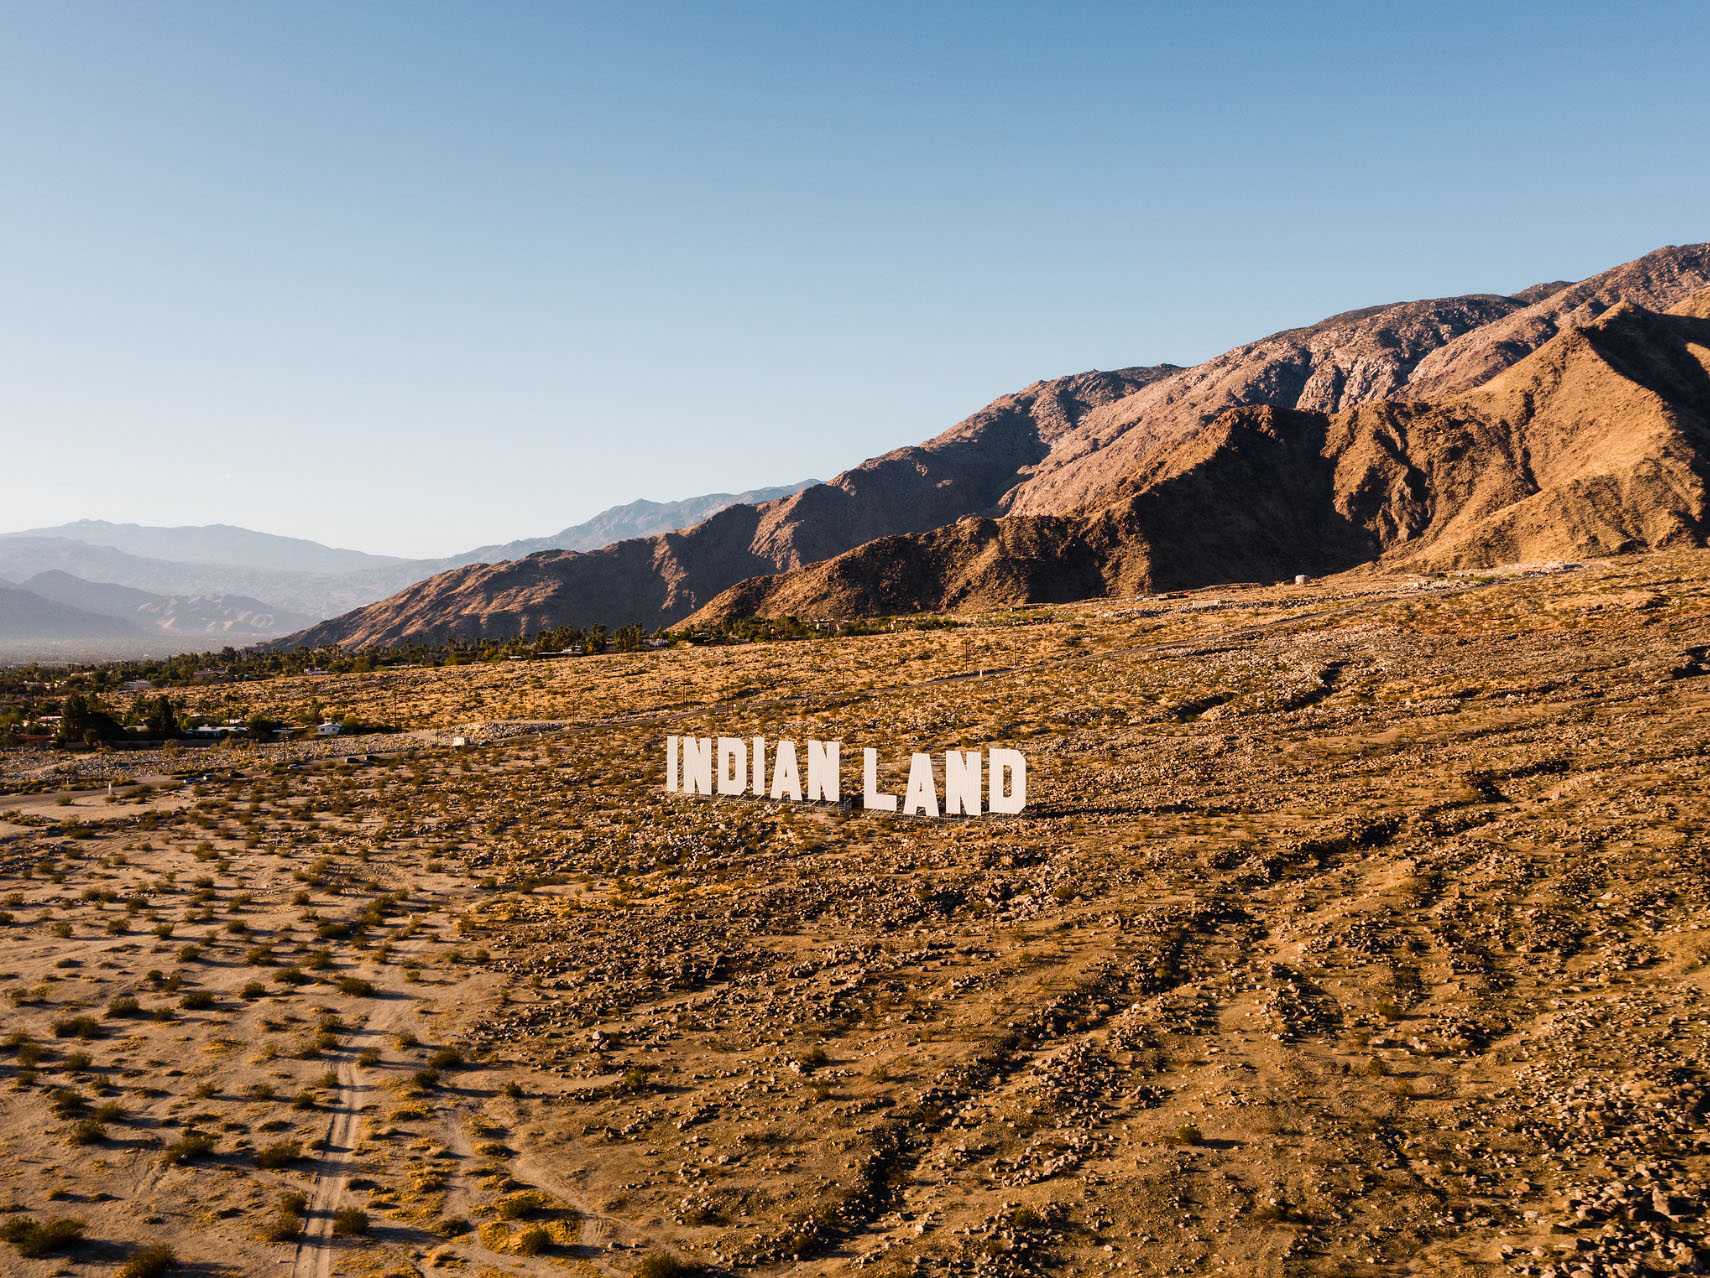 Indian Land sign in middle of desert.